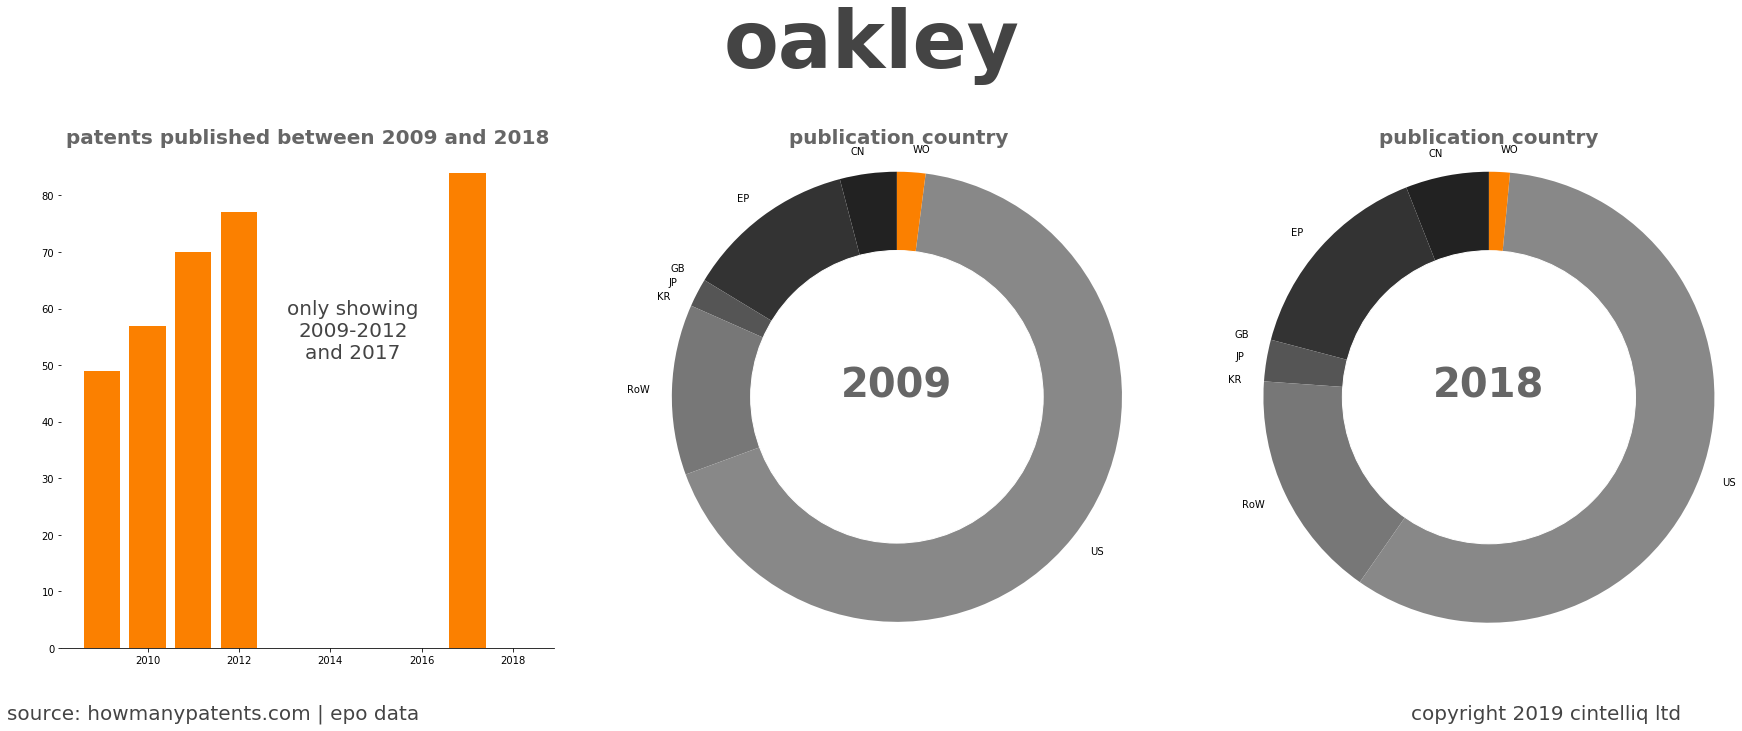 summary of patents for Oakley